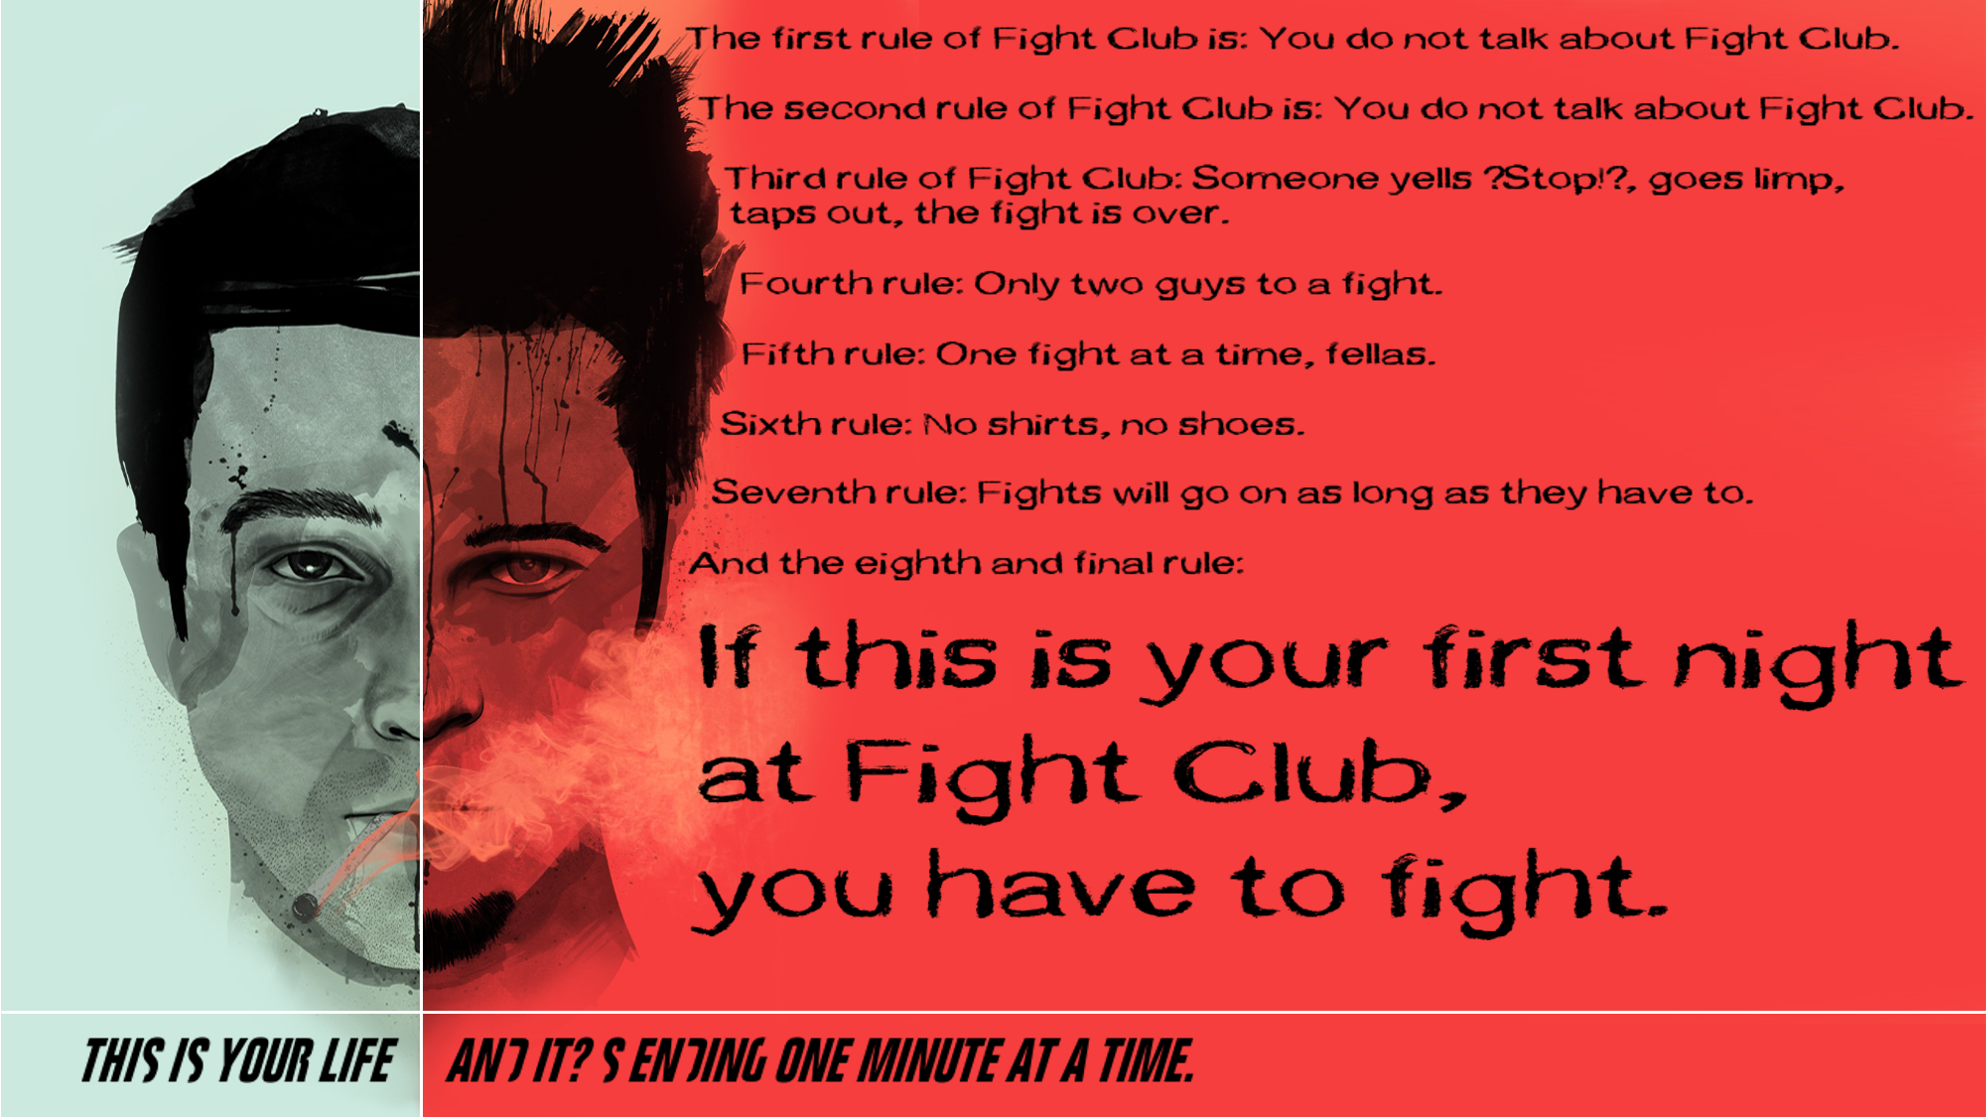 Rules of Fight Club by Janiel127